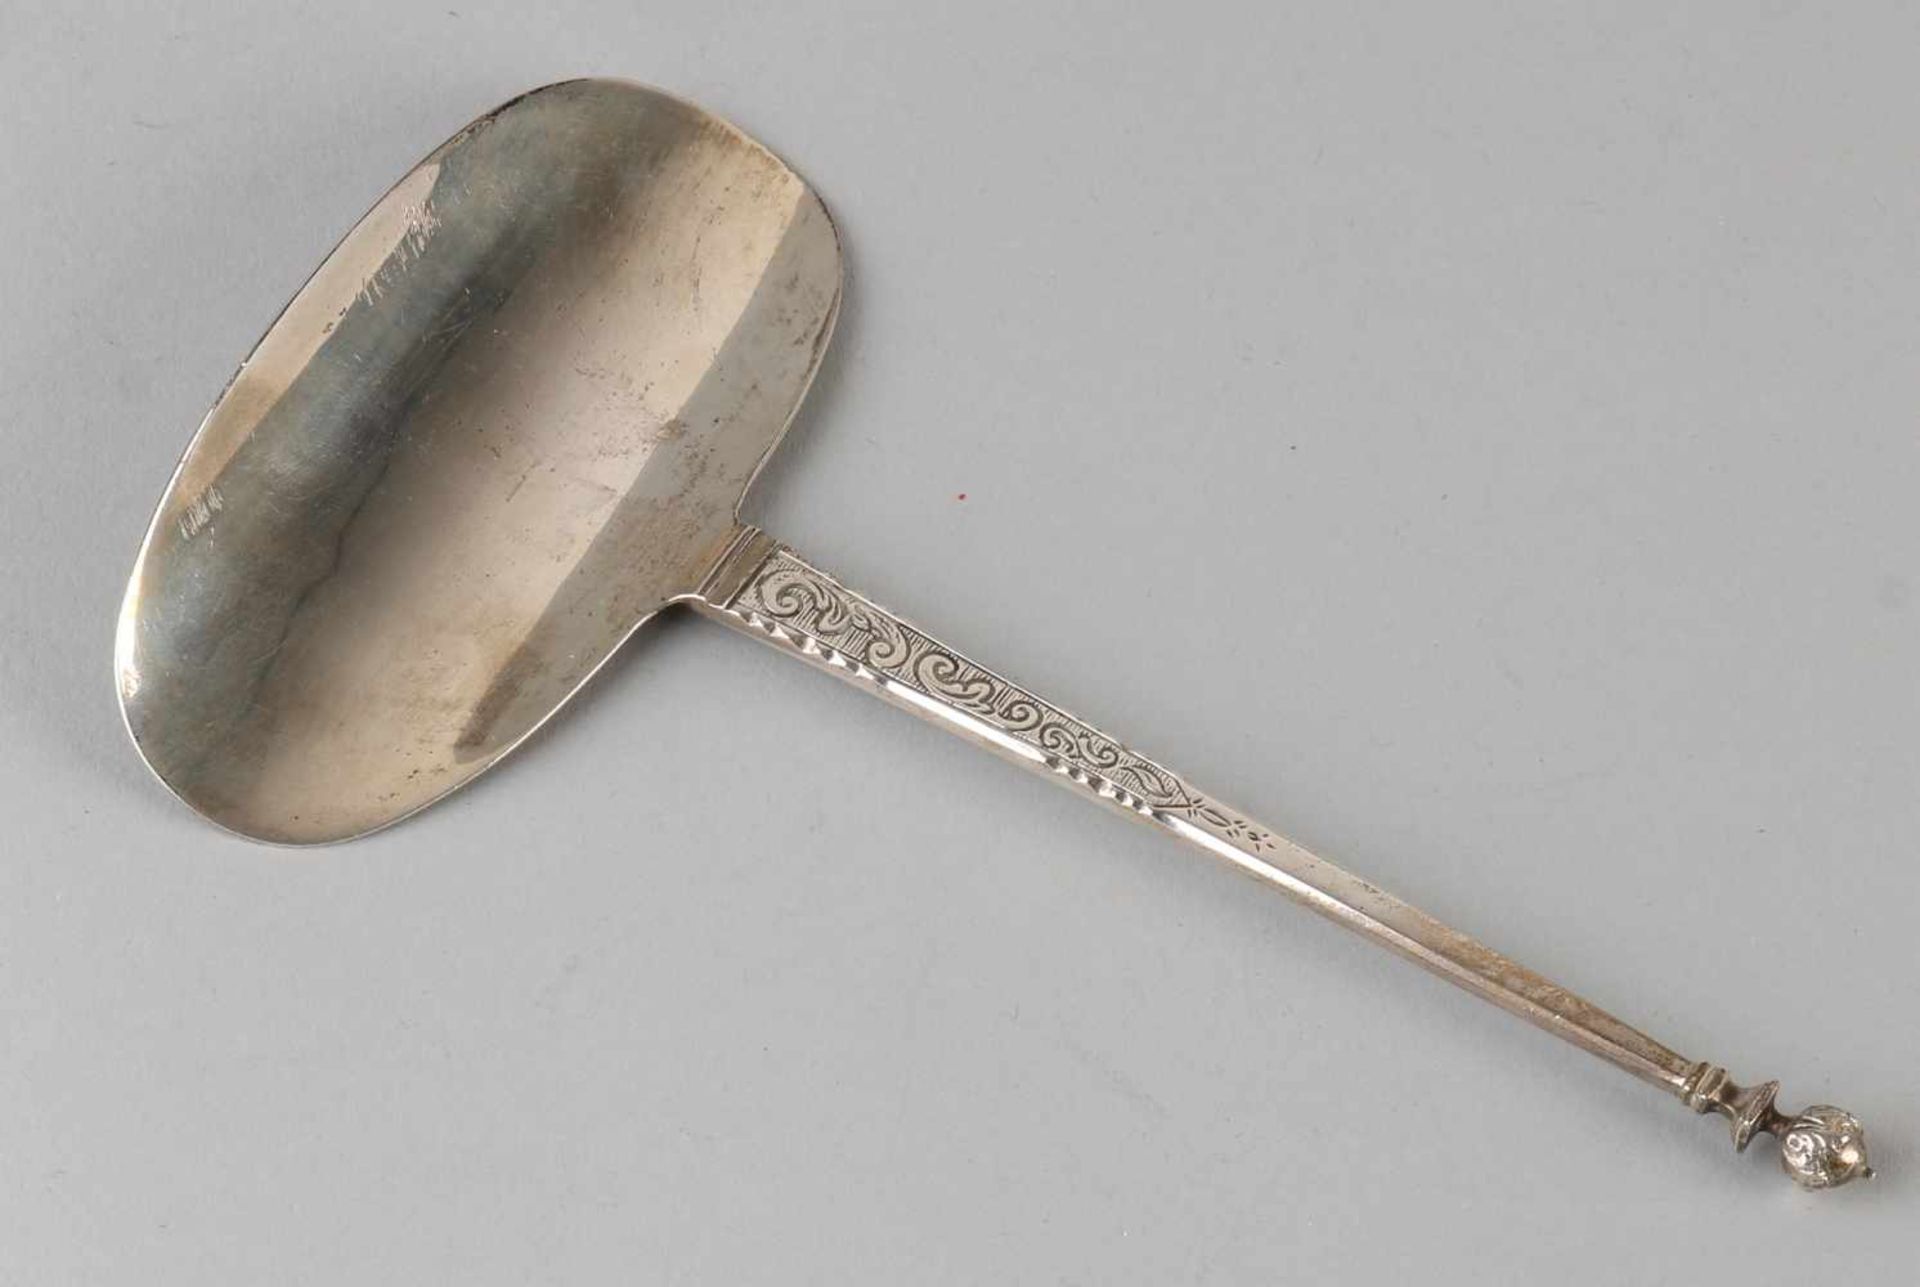 Silver croquette shovel, 833/000, with a tight tapered stem with engravings, topped with a button.